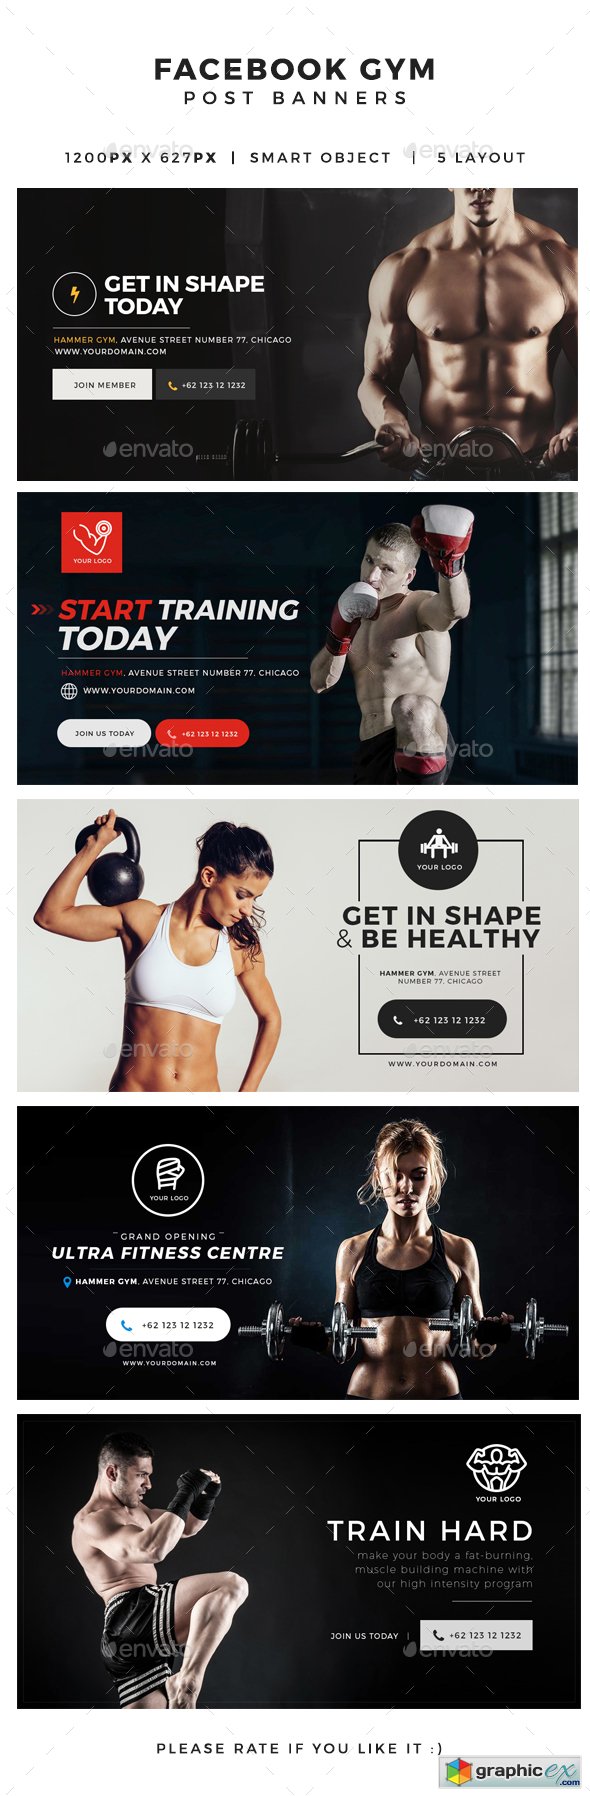 Gym & Fitness Facebook Post Banners